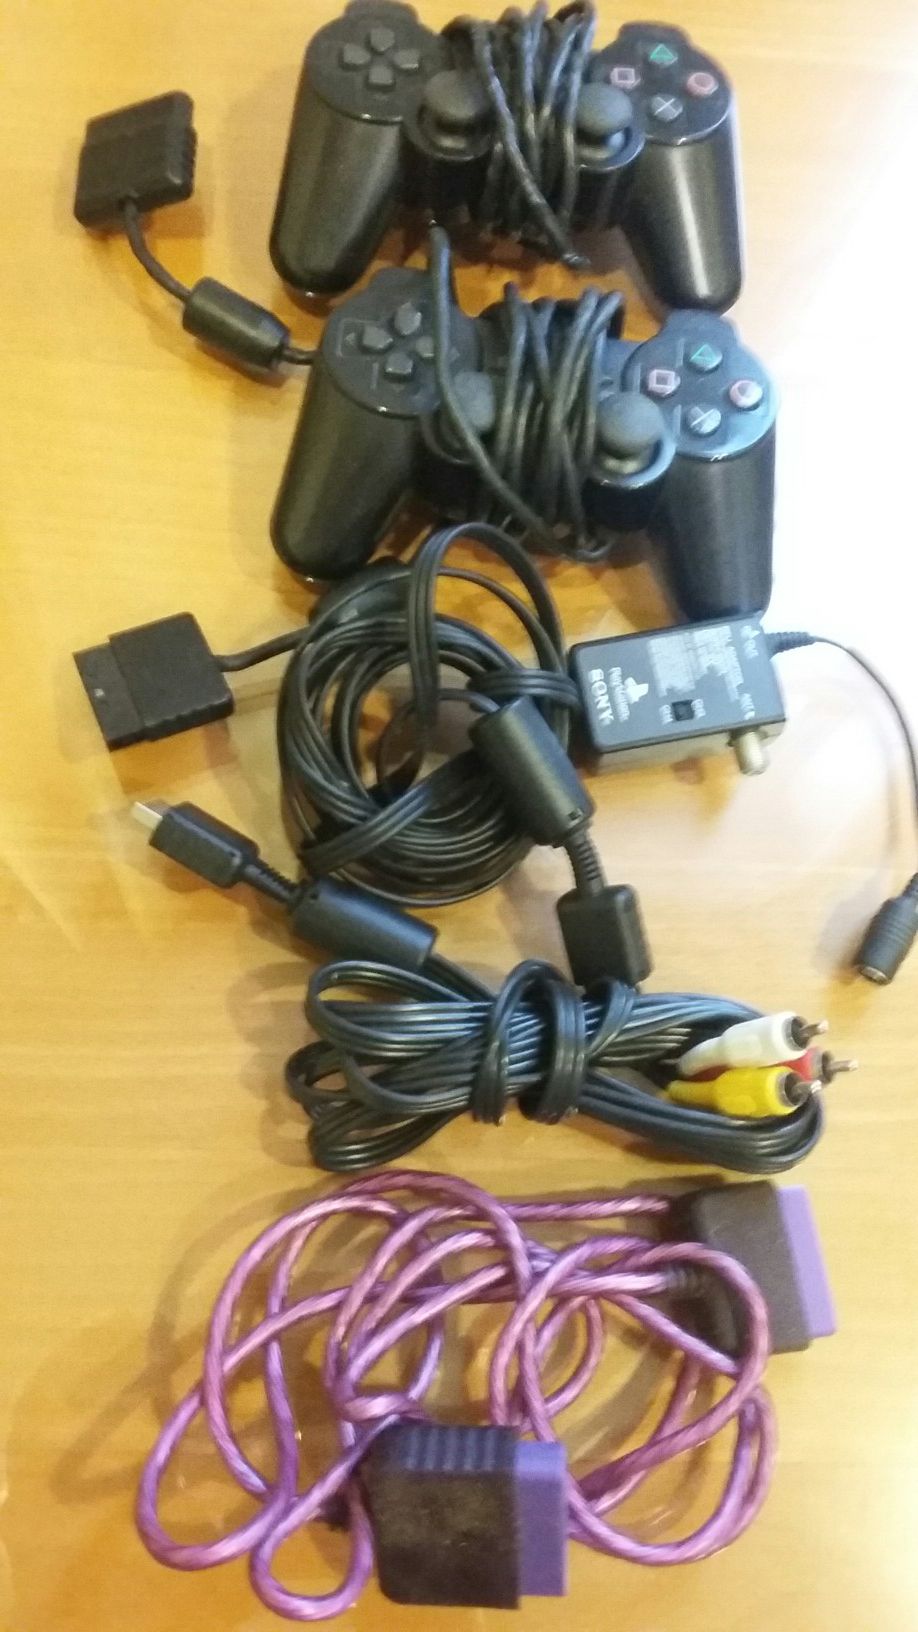 2 CONTROLERS SONY PLAYSTATION WITH EXTRA CABLES $14 FOR ALL